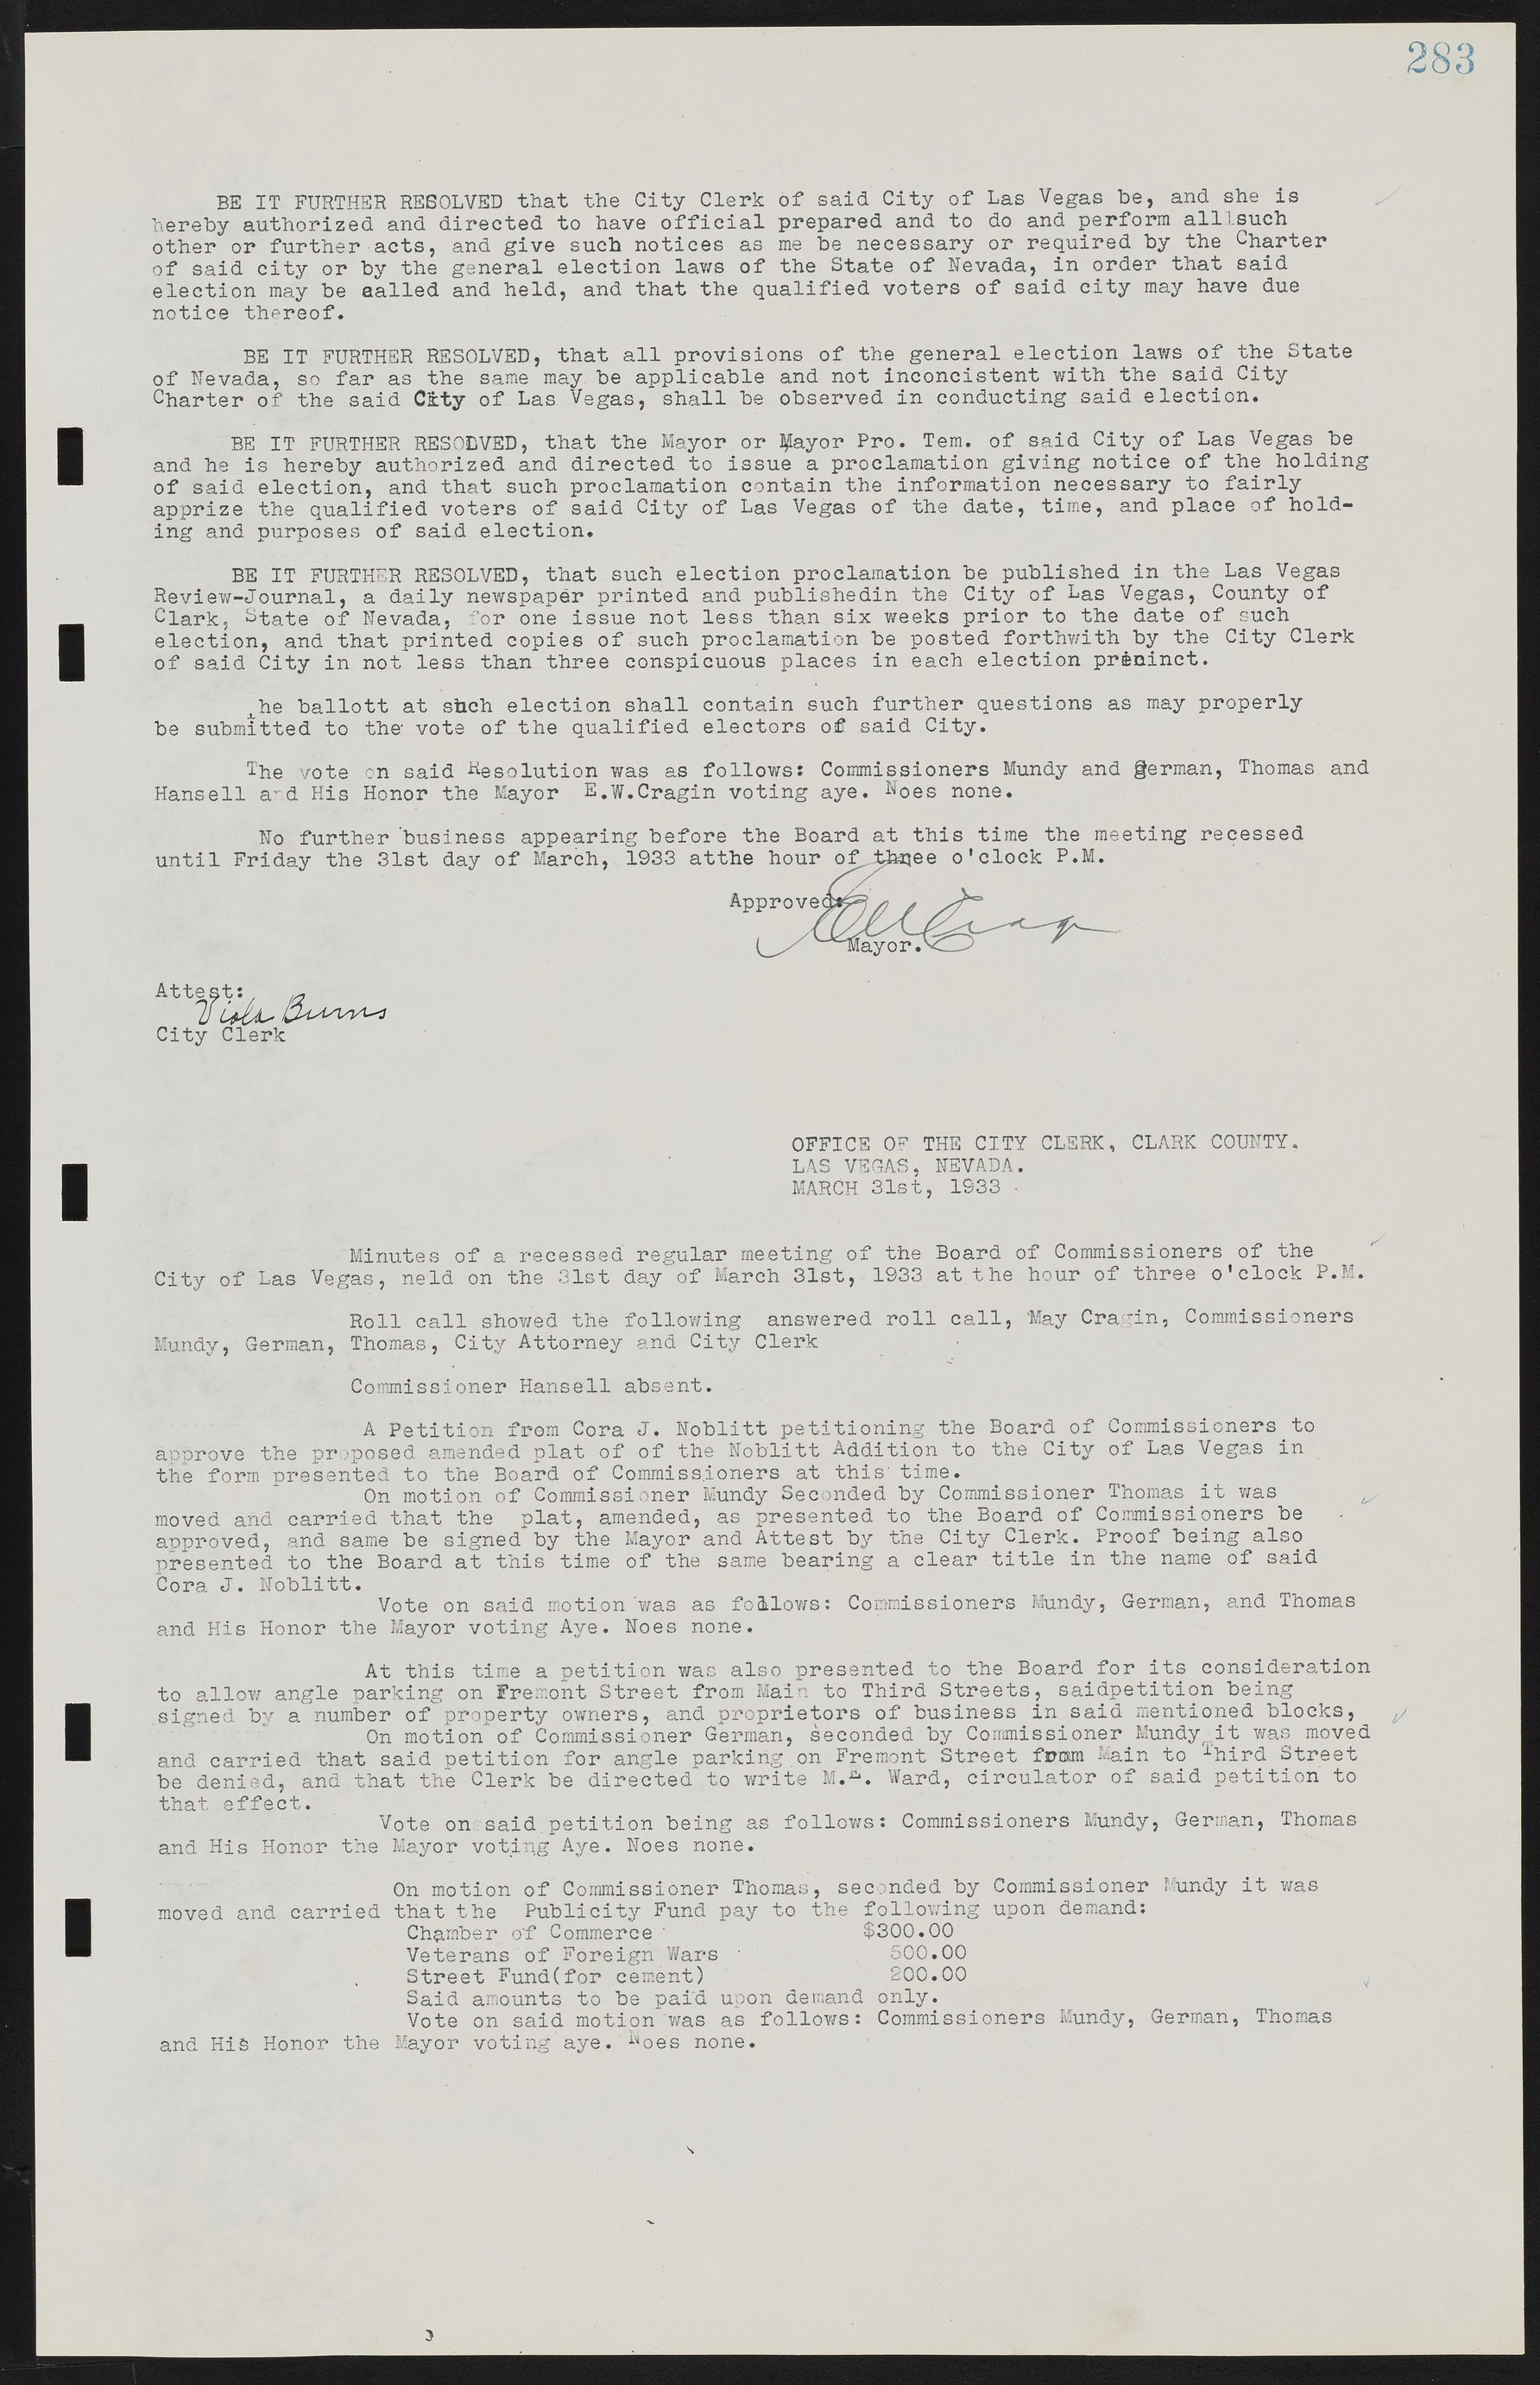 Las Vegas City Commission Minutes, May 14, 1929 to February 11, 1937, lvc000003-289